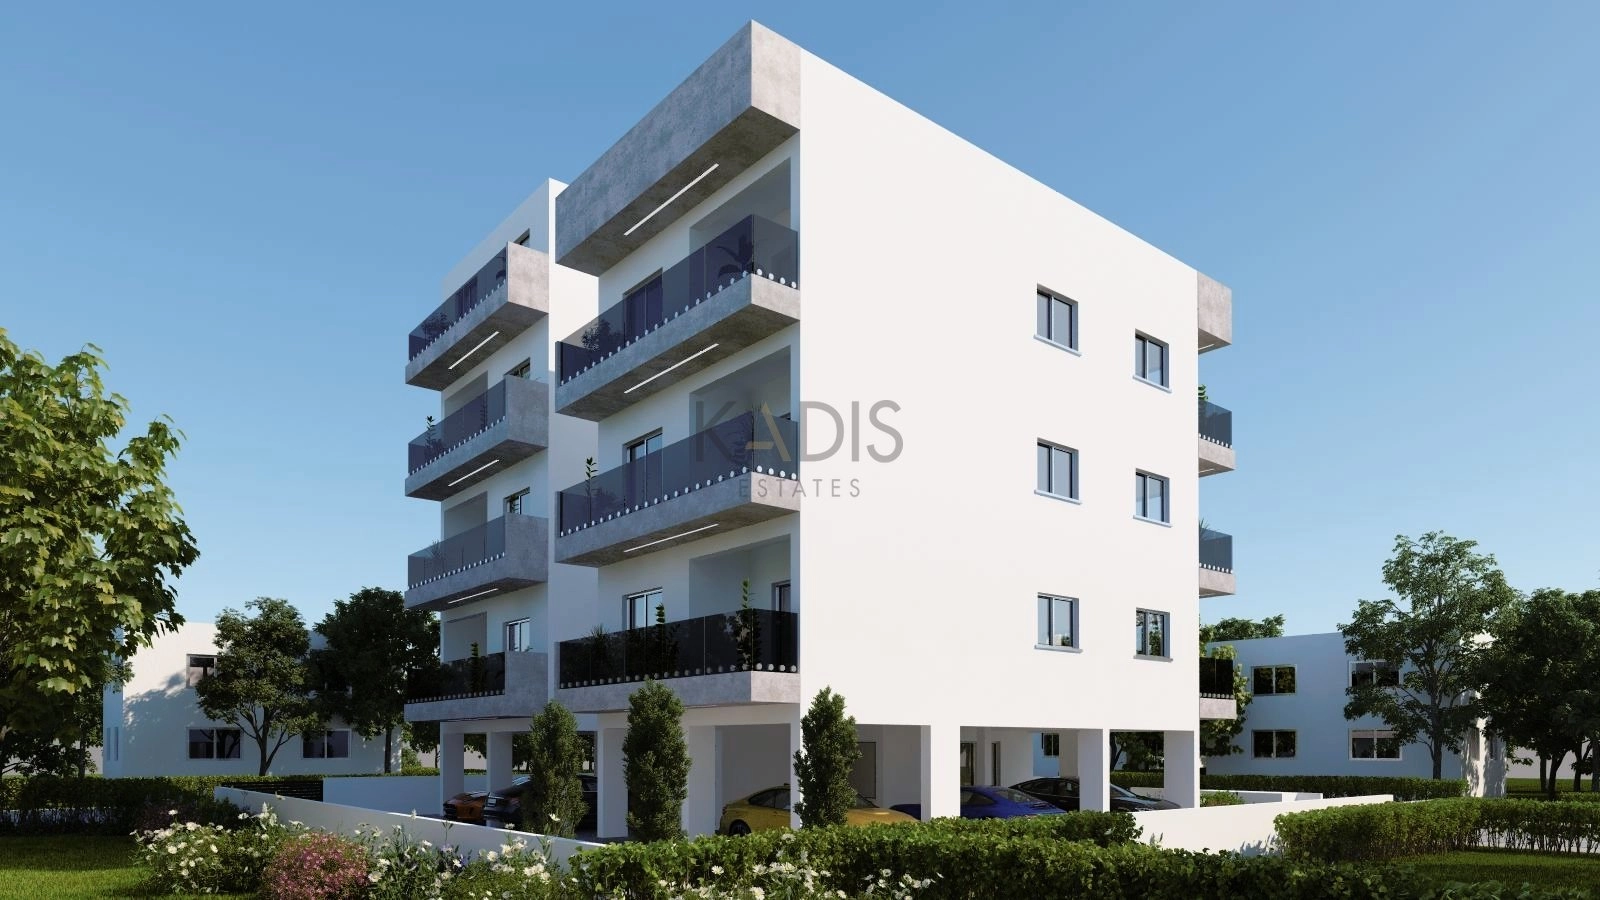 2 Bedroom Apartment for Sale in Limassol – Apostolos Andreas